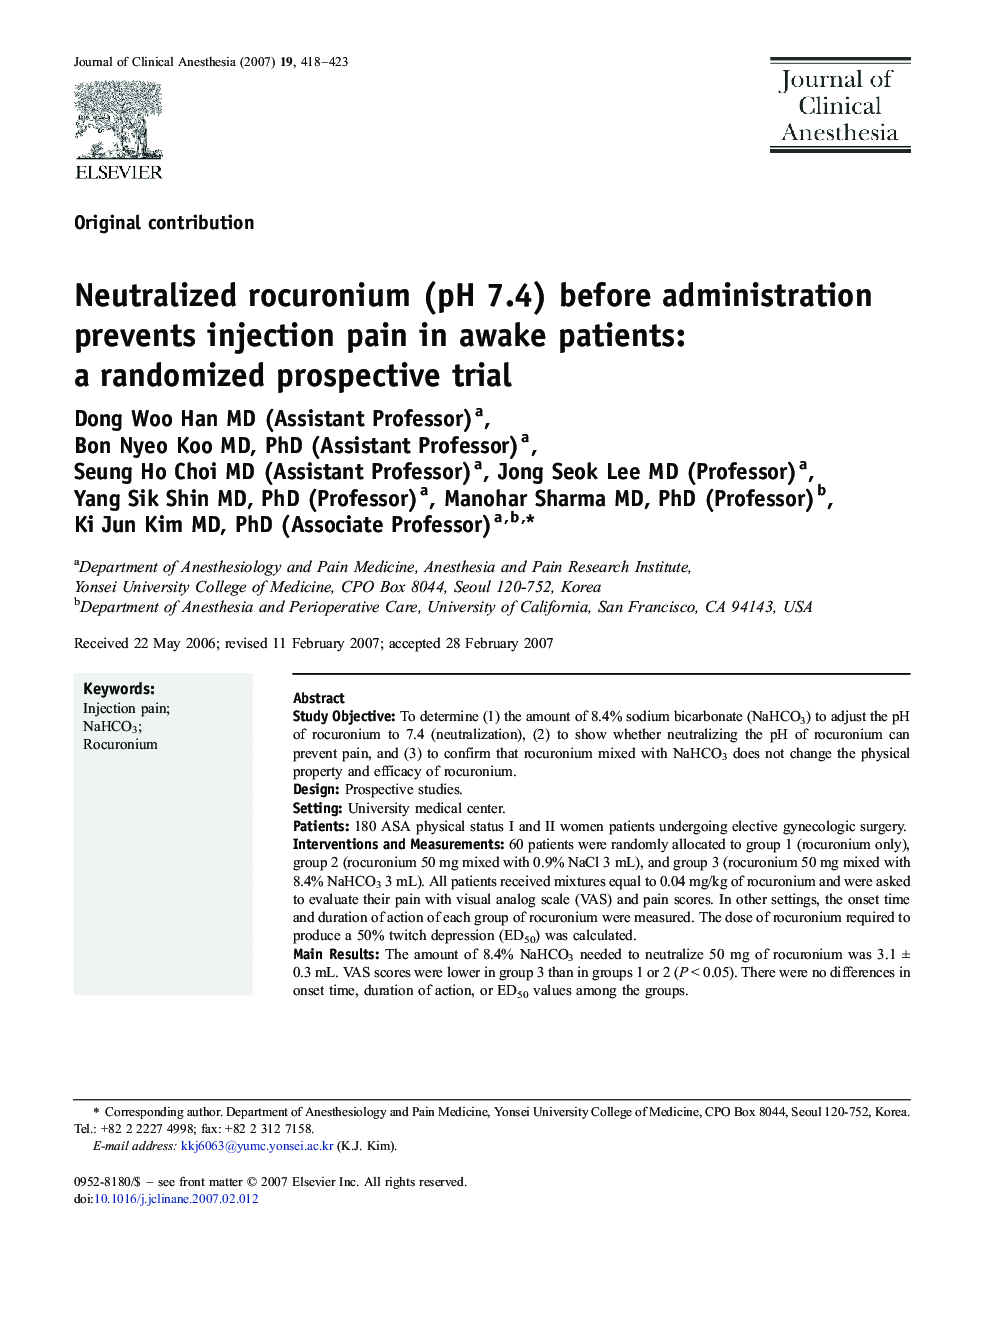 Neutralized rocuronium (pH 7.4) before administration prevents injection pain in awake patients: a randomized prospective trial